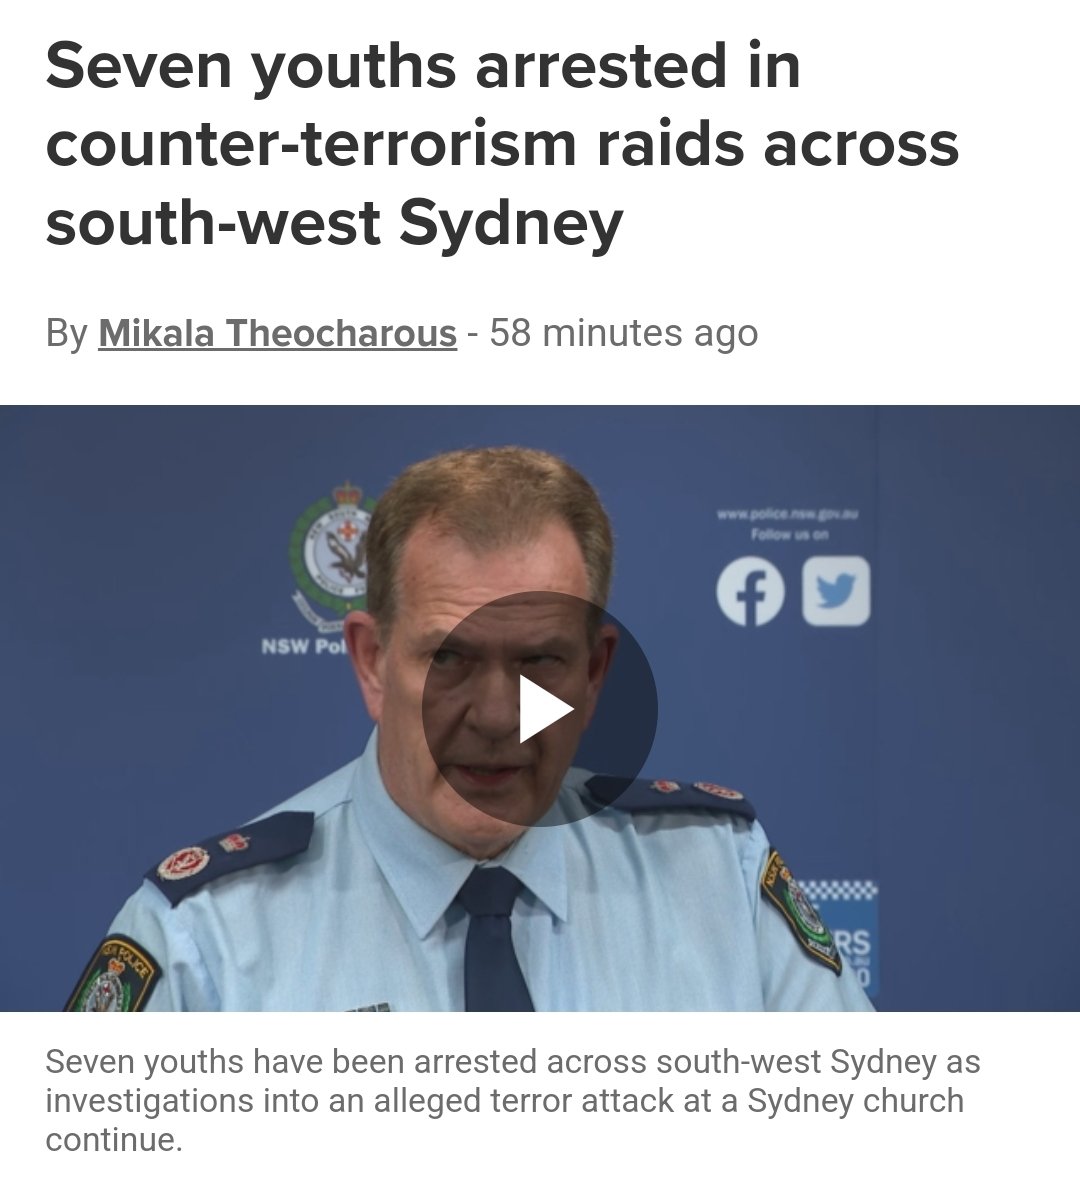 First we hear of pro palestine disruptors wanting to agitate on ANZAC day

Then we see 7 young offenders arrested in counter terrorism raids

We warned of the consequences of inaction after the Oct 9 separatist hate rally in support of Hamas.

We absolutely have every right to…